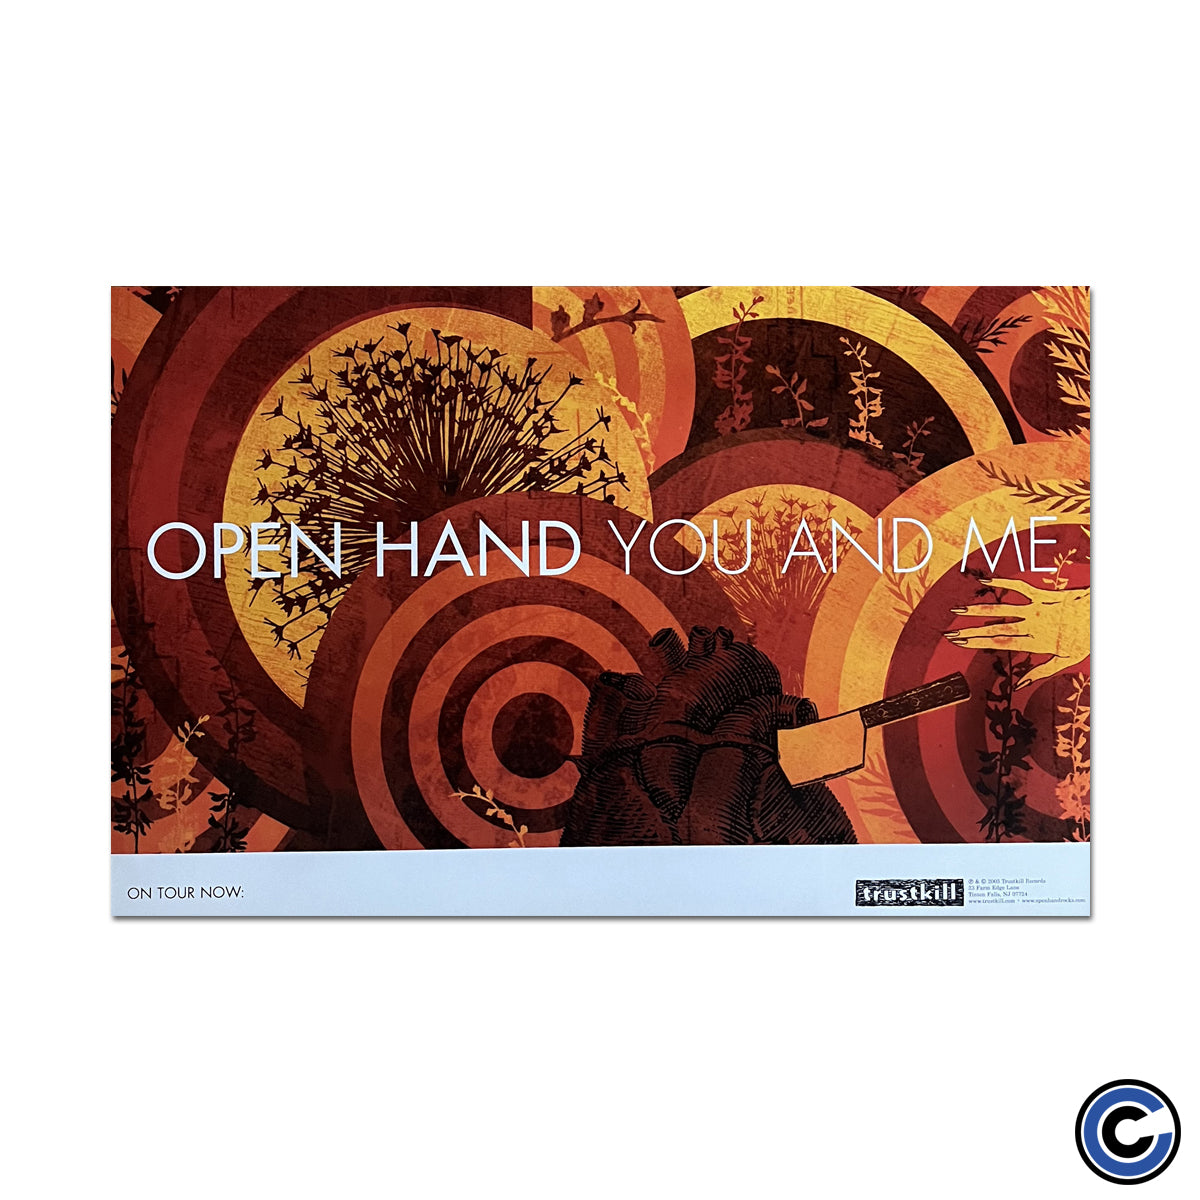 Open Hand "You And Me" Poster